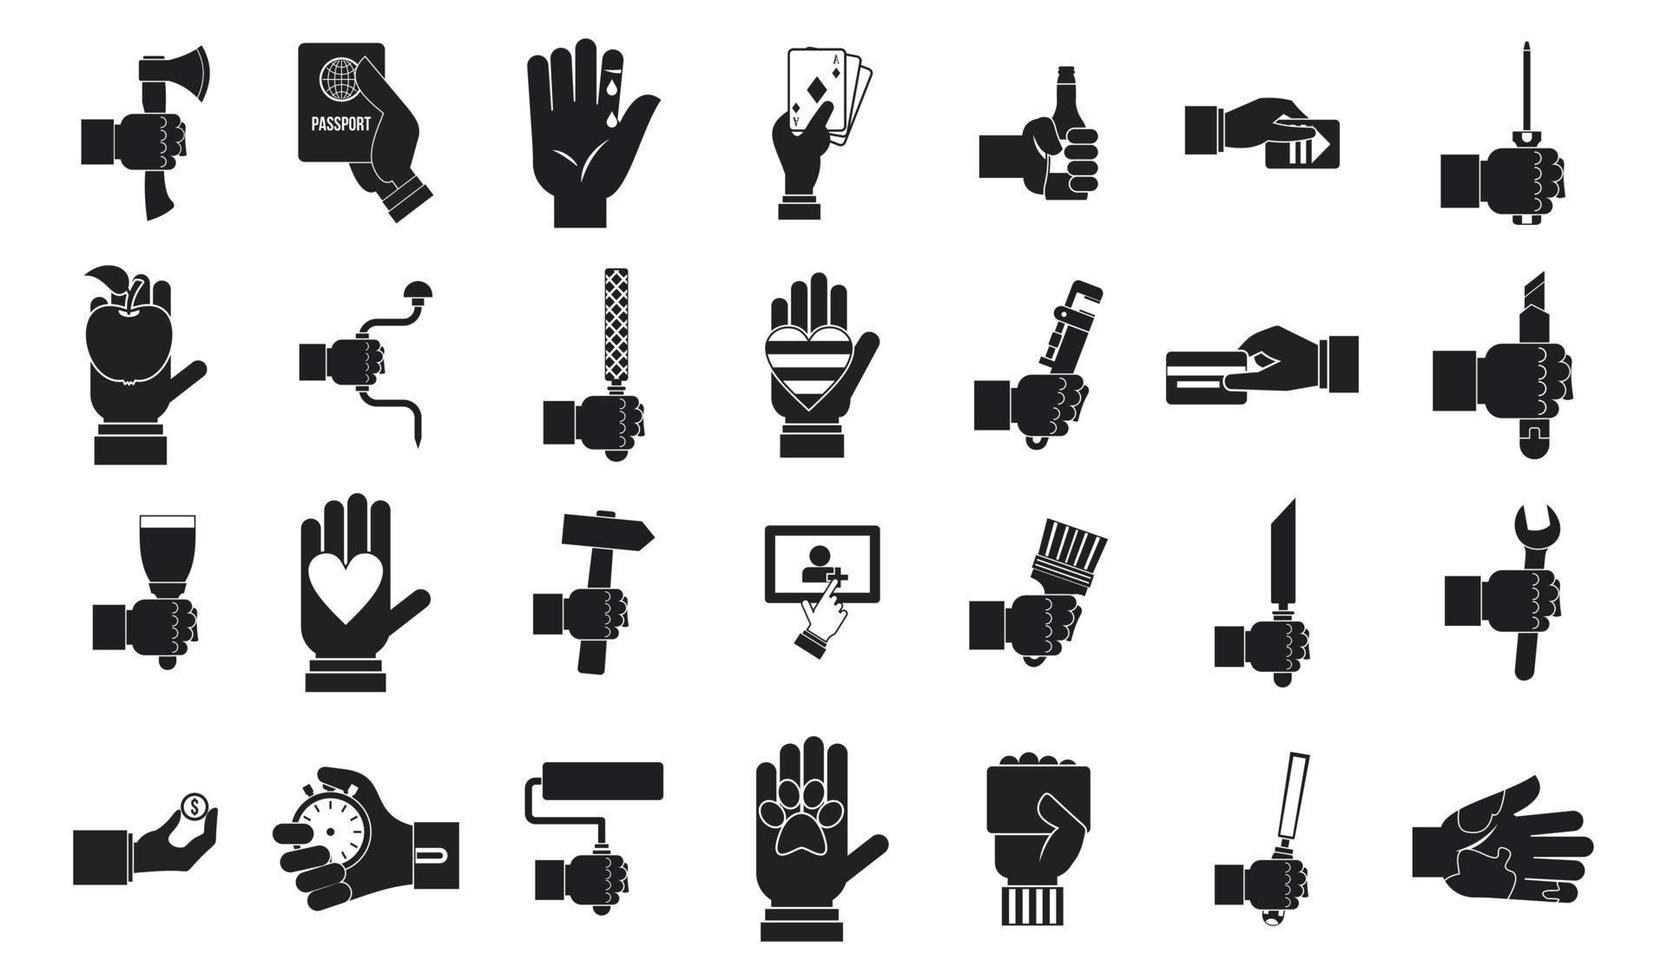 Hand object icon set, simple style vector